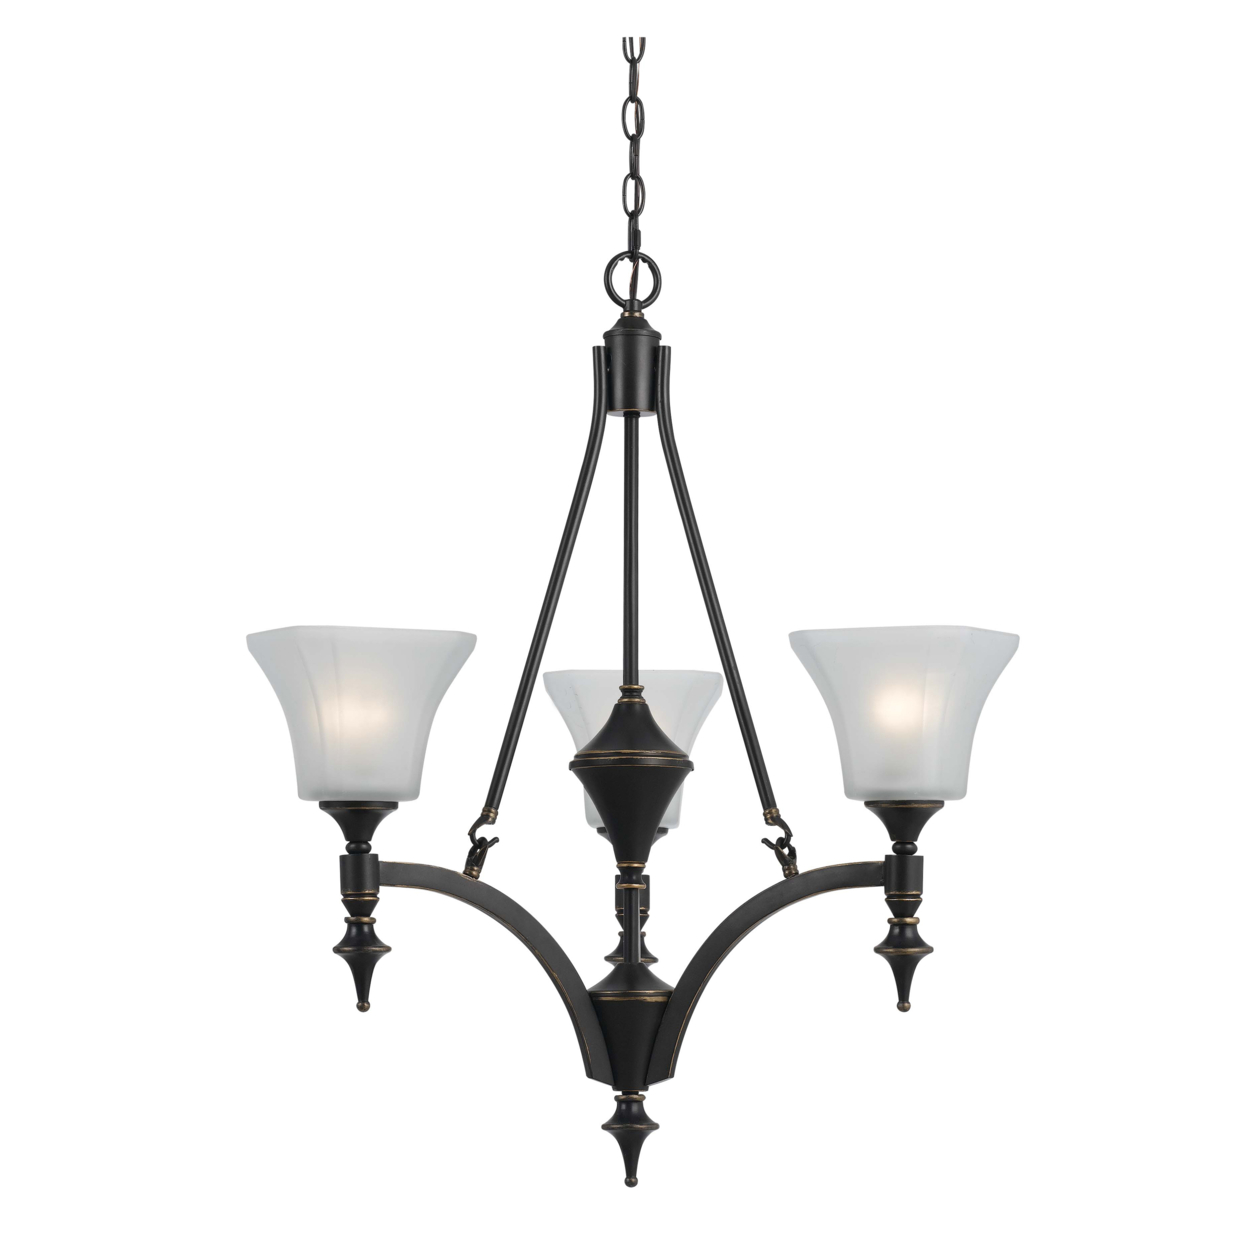 3 Bulb Chandelier With Glass Shade And Metal Frame, Black And White- Saltoro Sherpi